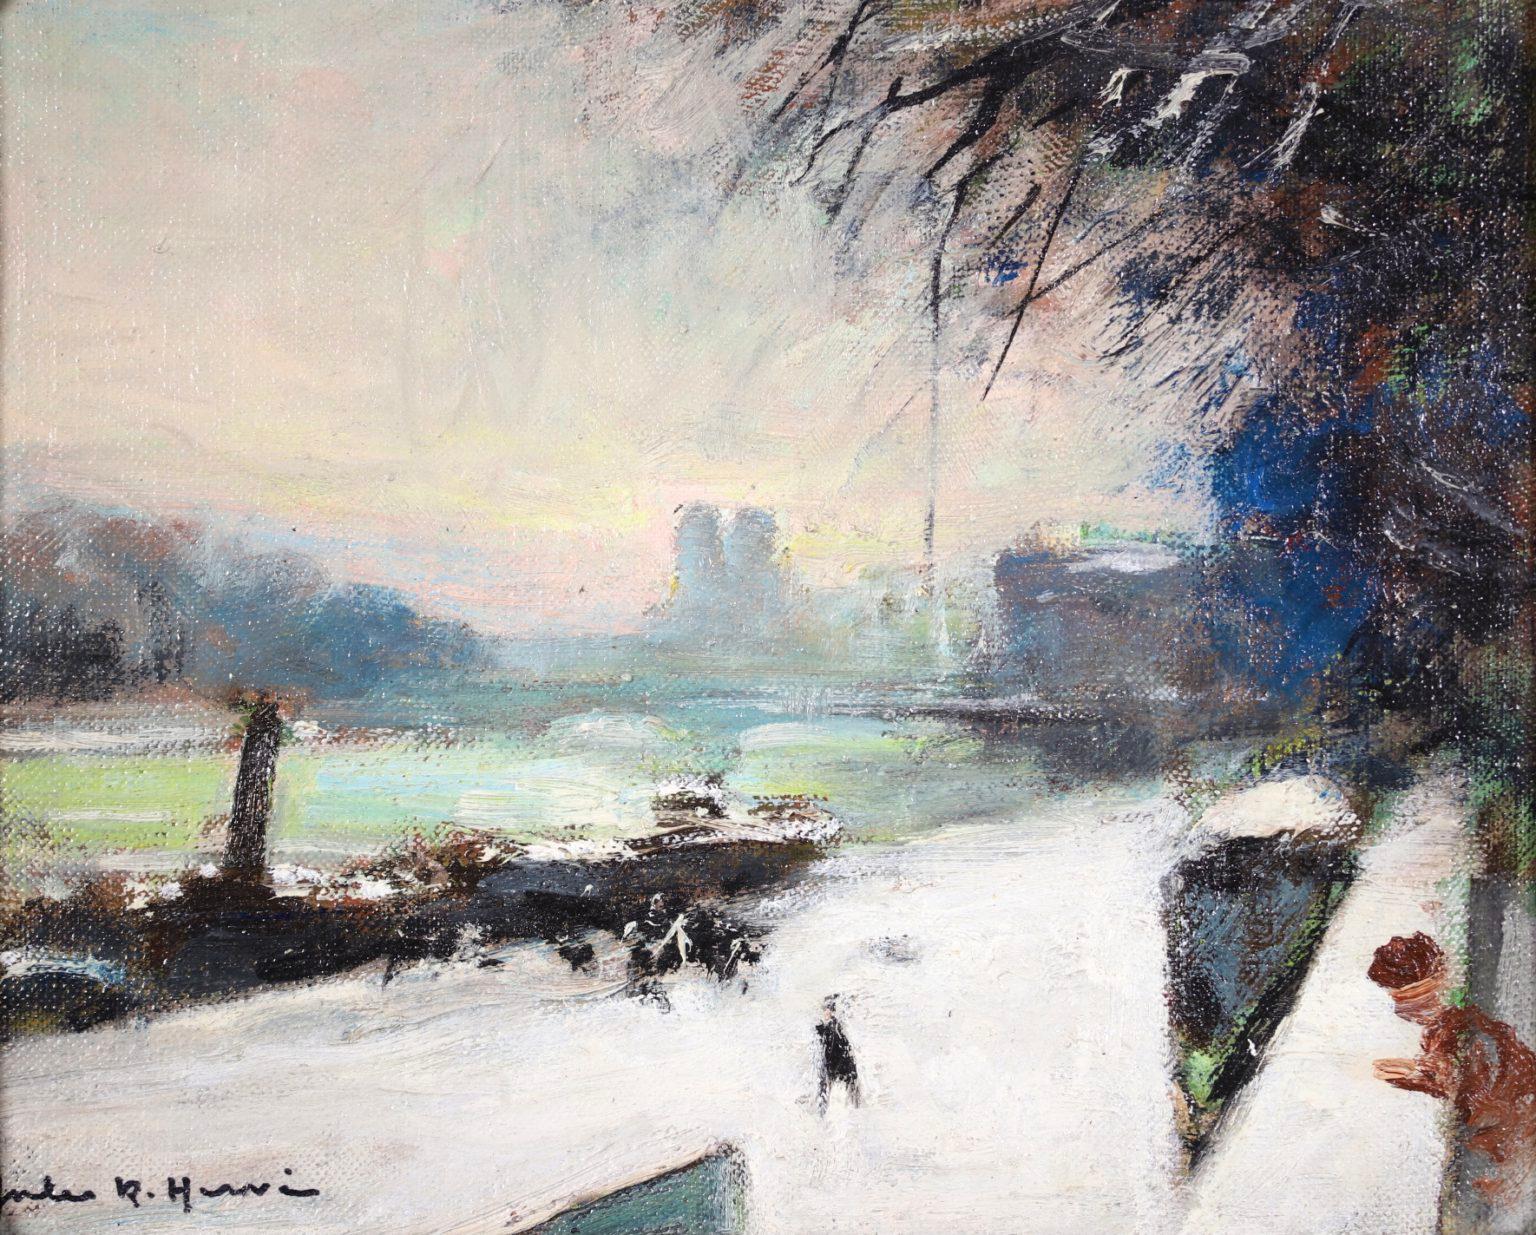 Seine in the Snow - Impressionist Oil, Figures in Riverscape by Jules Rene Herve - Painting by Jules René Hervé